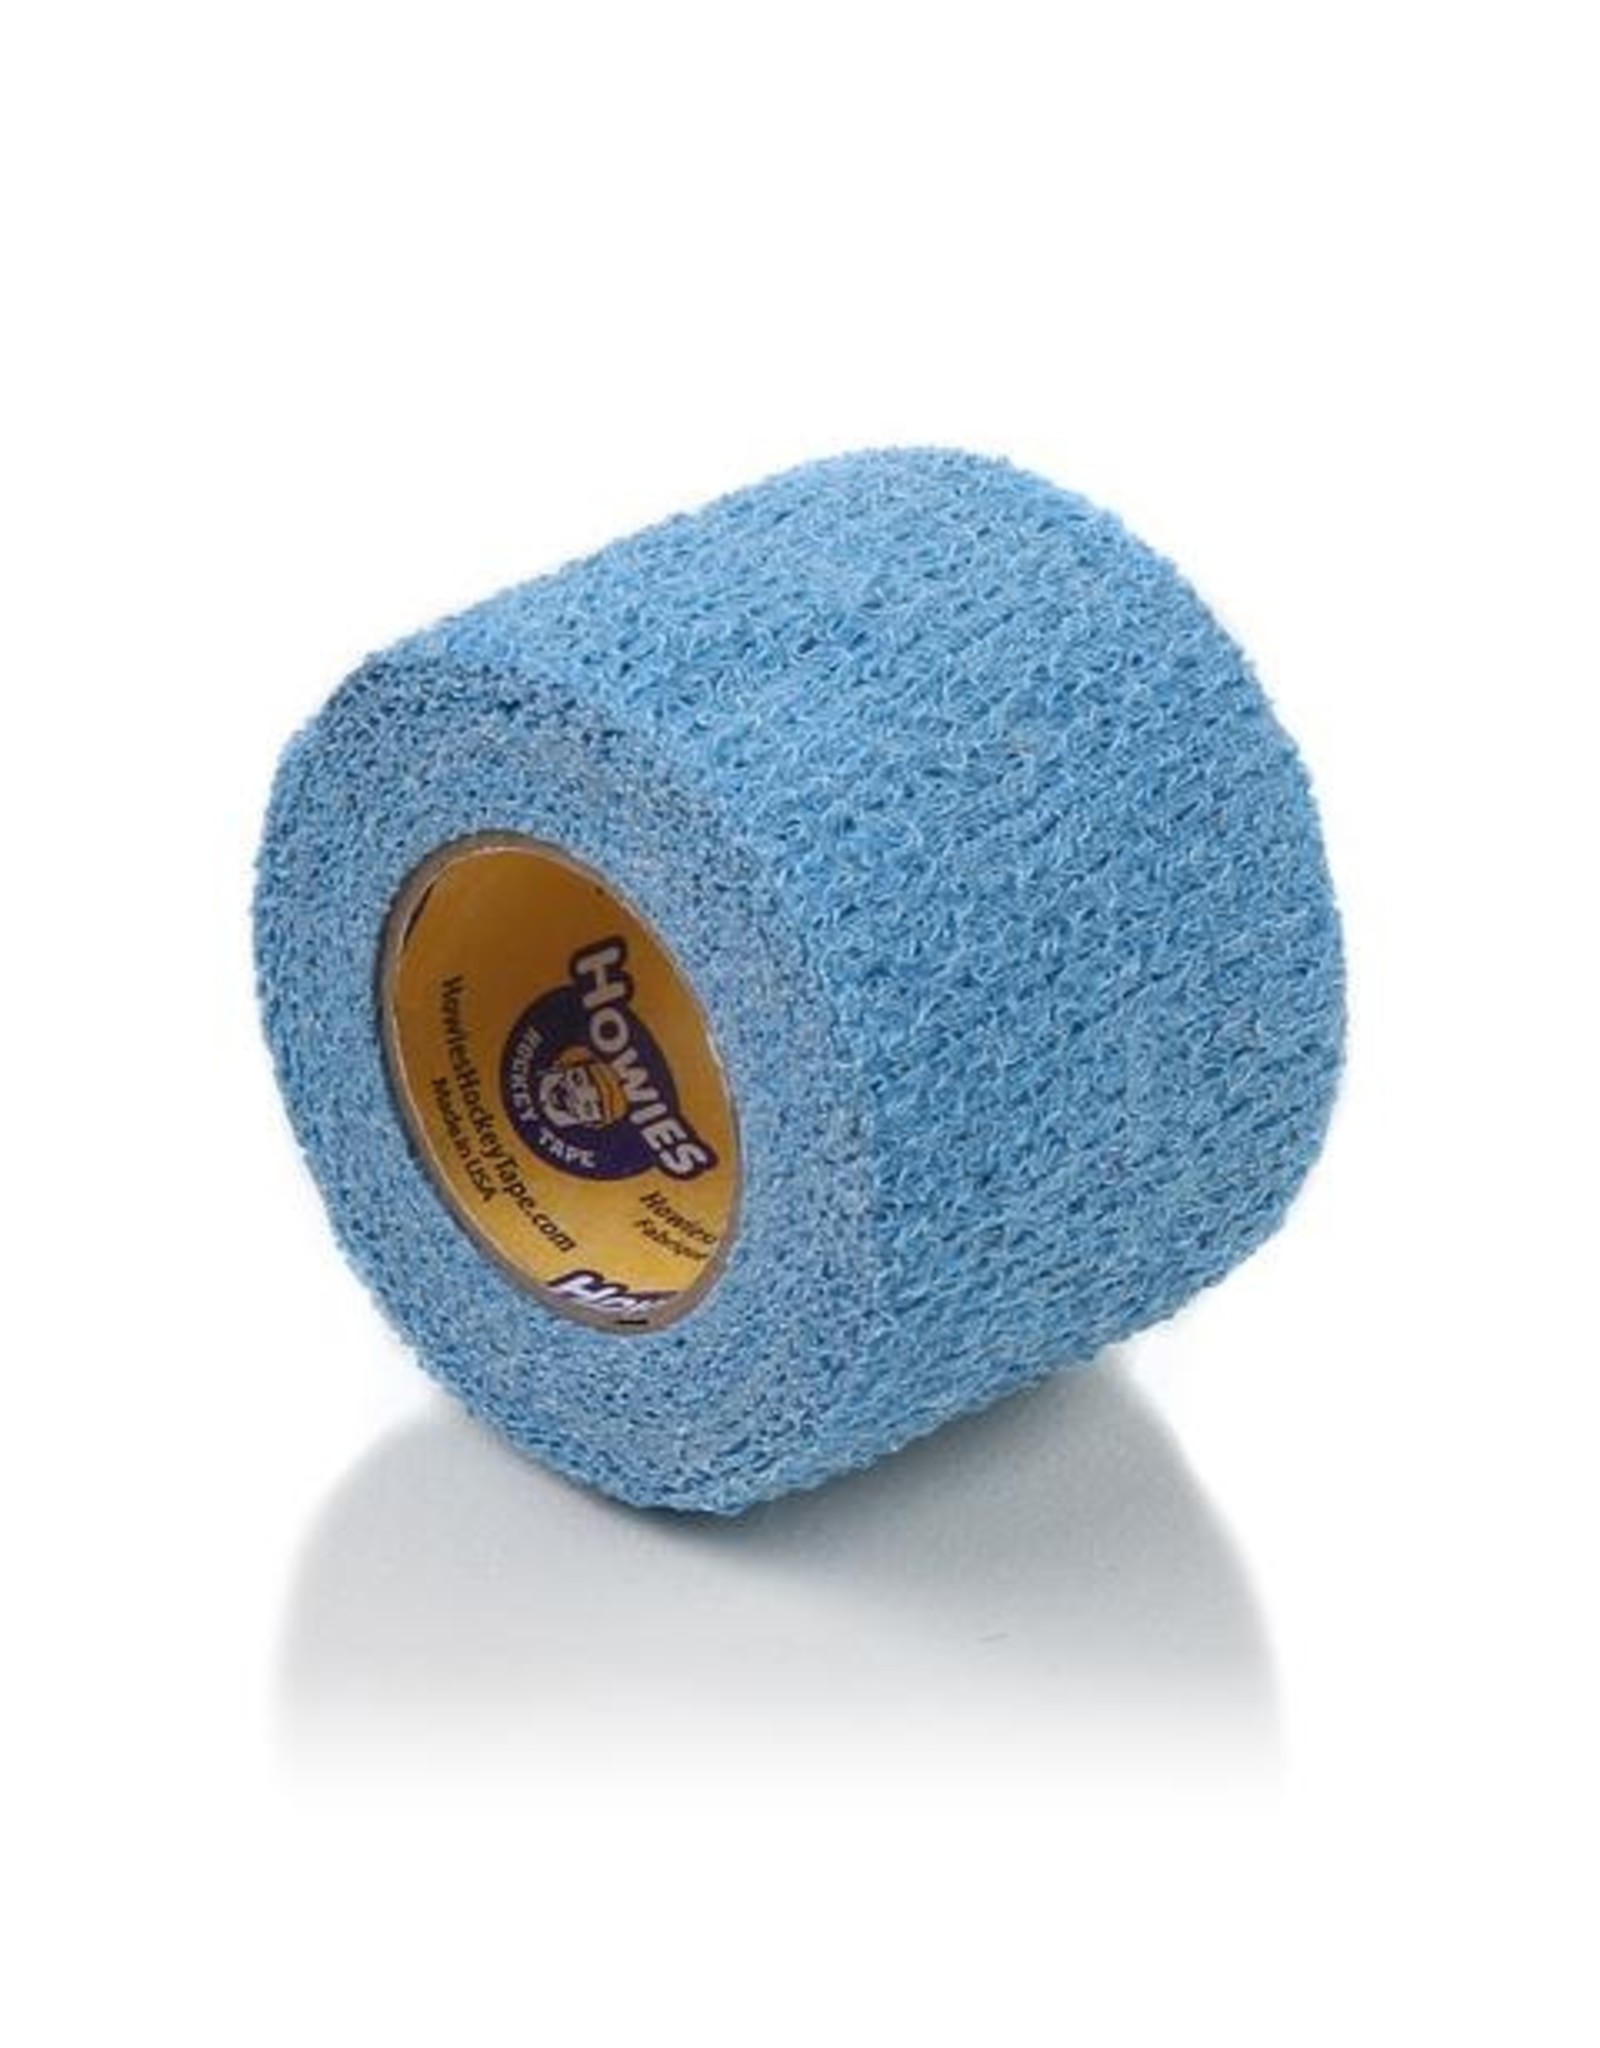 Howies Hockey tape HOWIES STRETCHY GRIP TAPE